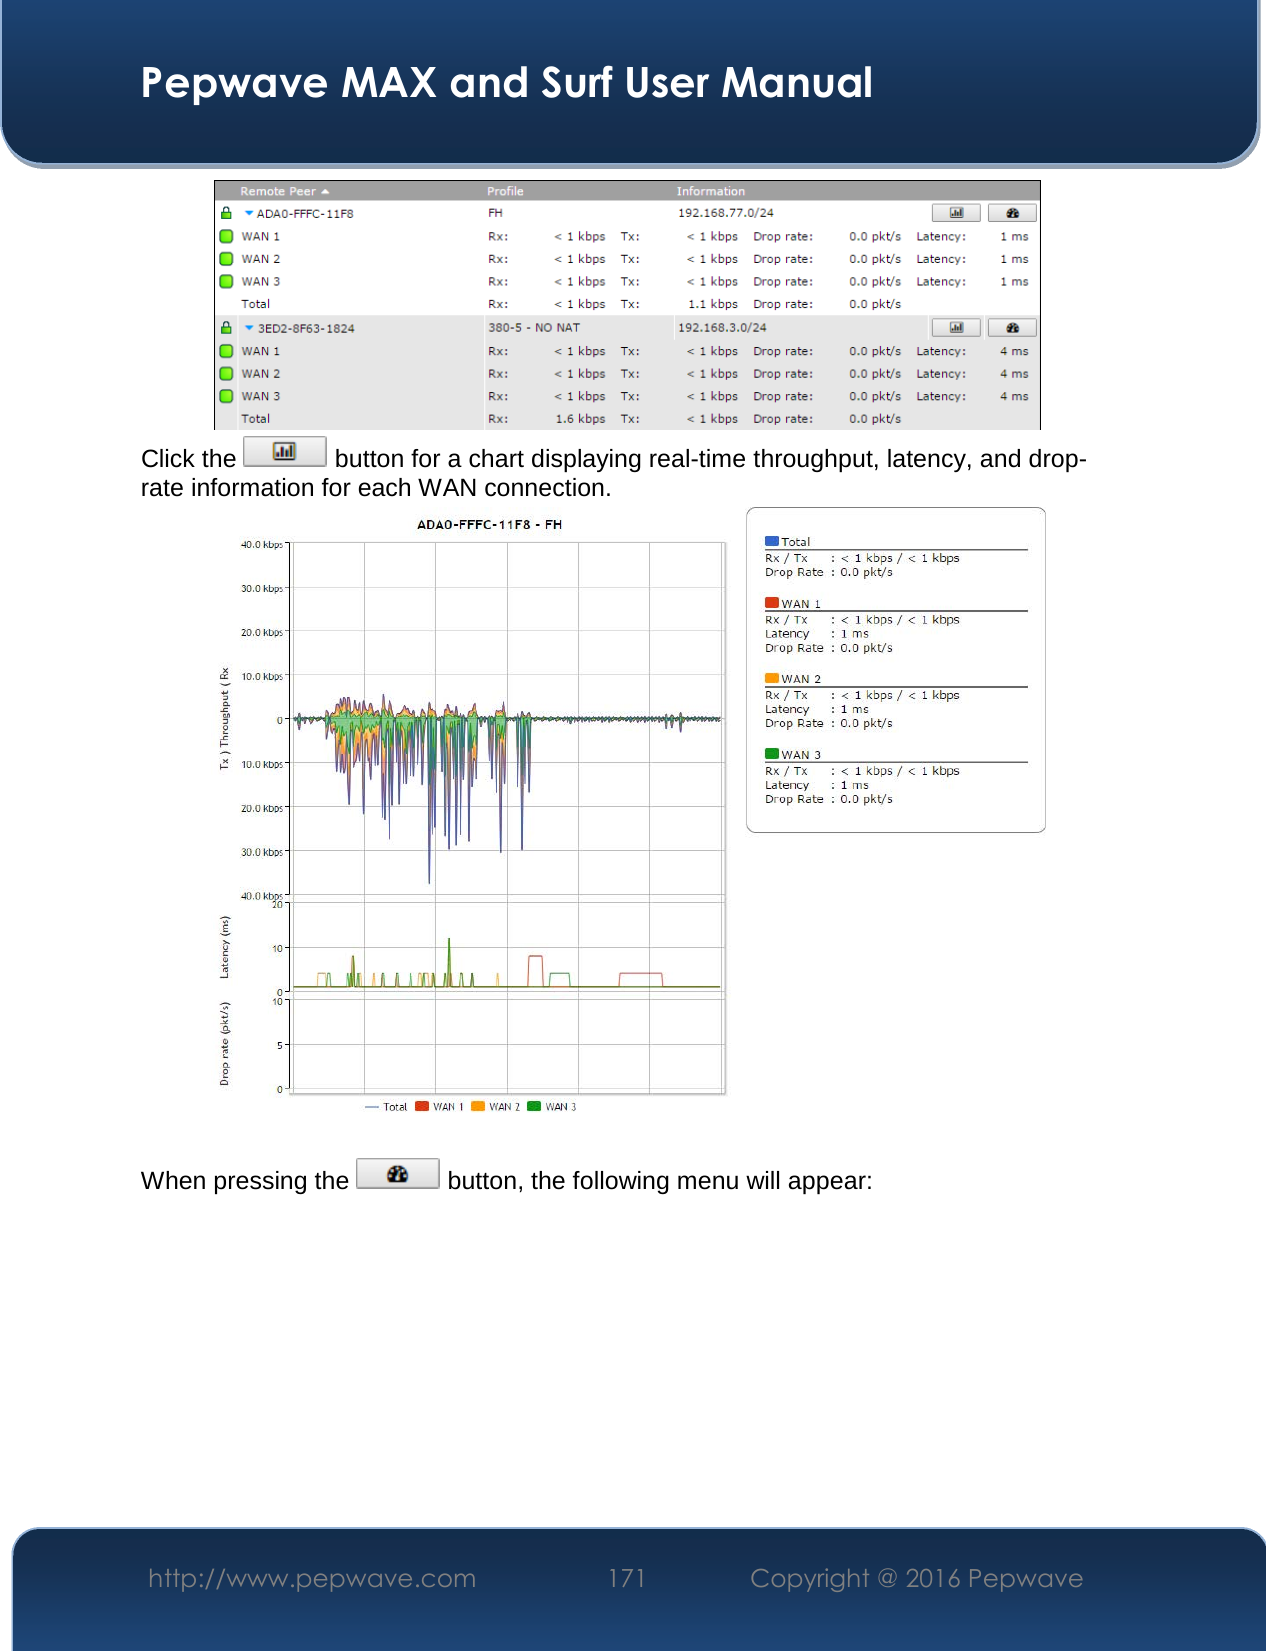  Pepwave MAX and Surf User Manual http://www.pepwave.com  171    Copyright @ 2016 Pepwave    Click the   button for a chart displaying real-time throughput, latency, and drop-rate information for each WAN connection.   When pressing the   button, the following menu will appear:  